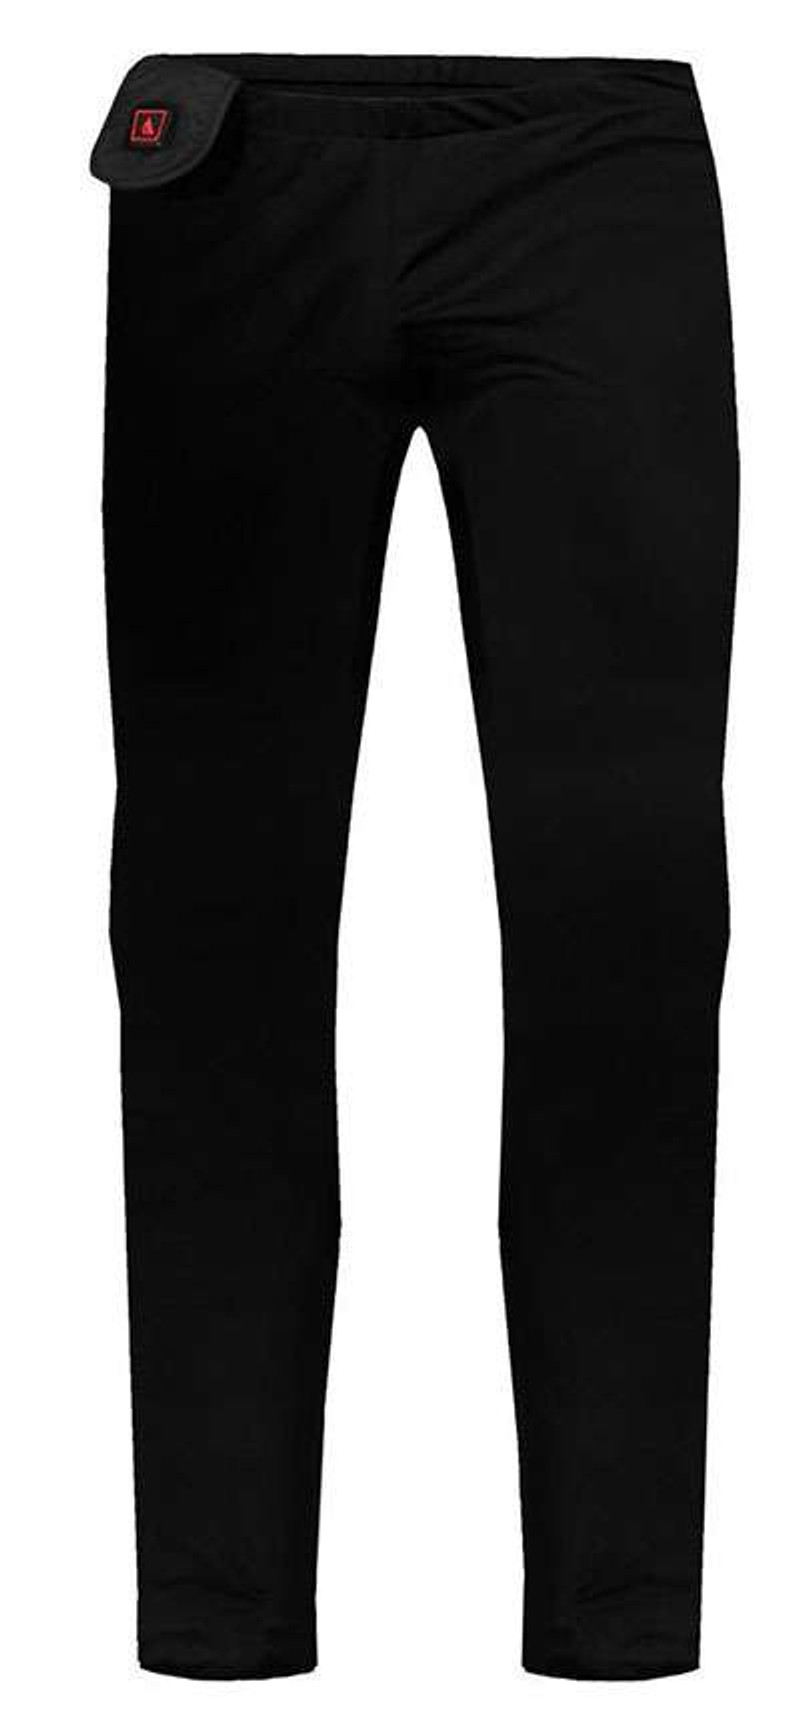 ActionHeat 5V Battery Heated Base Layer Pants - Women's